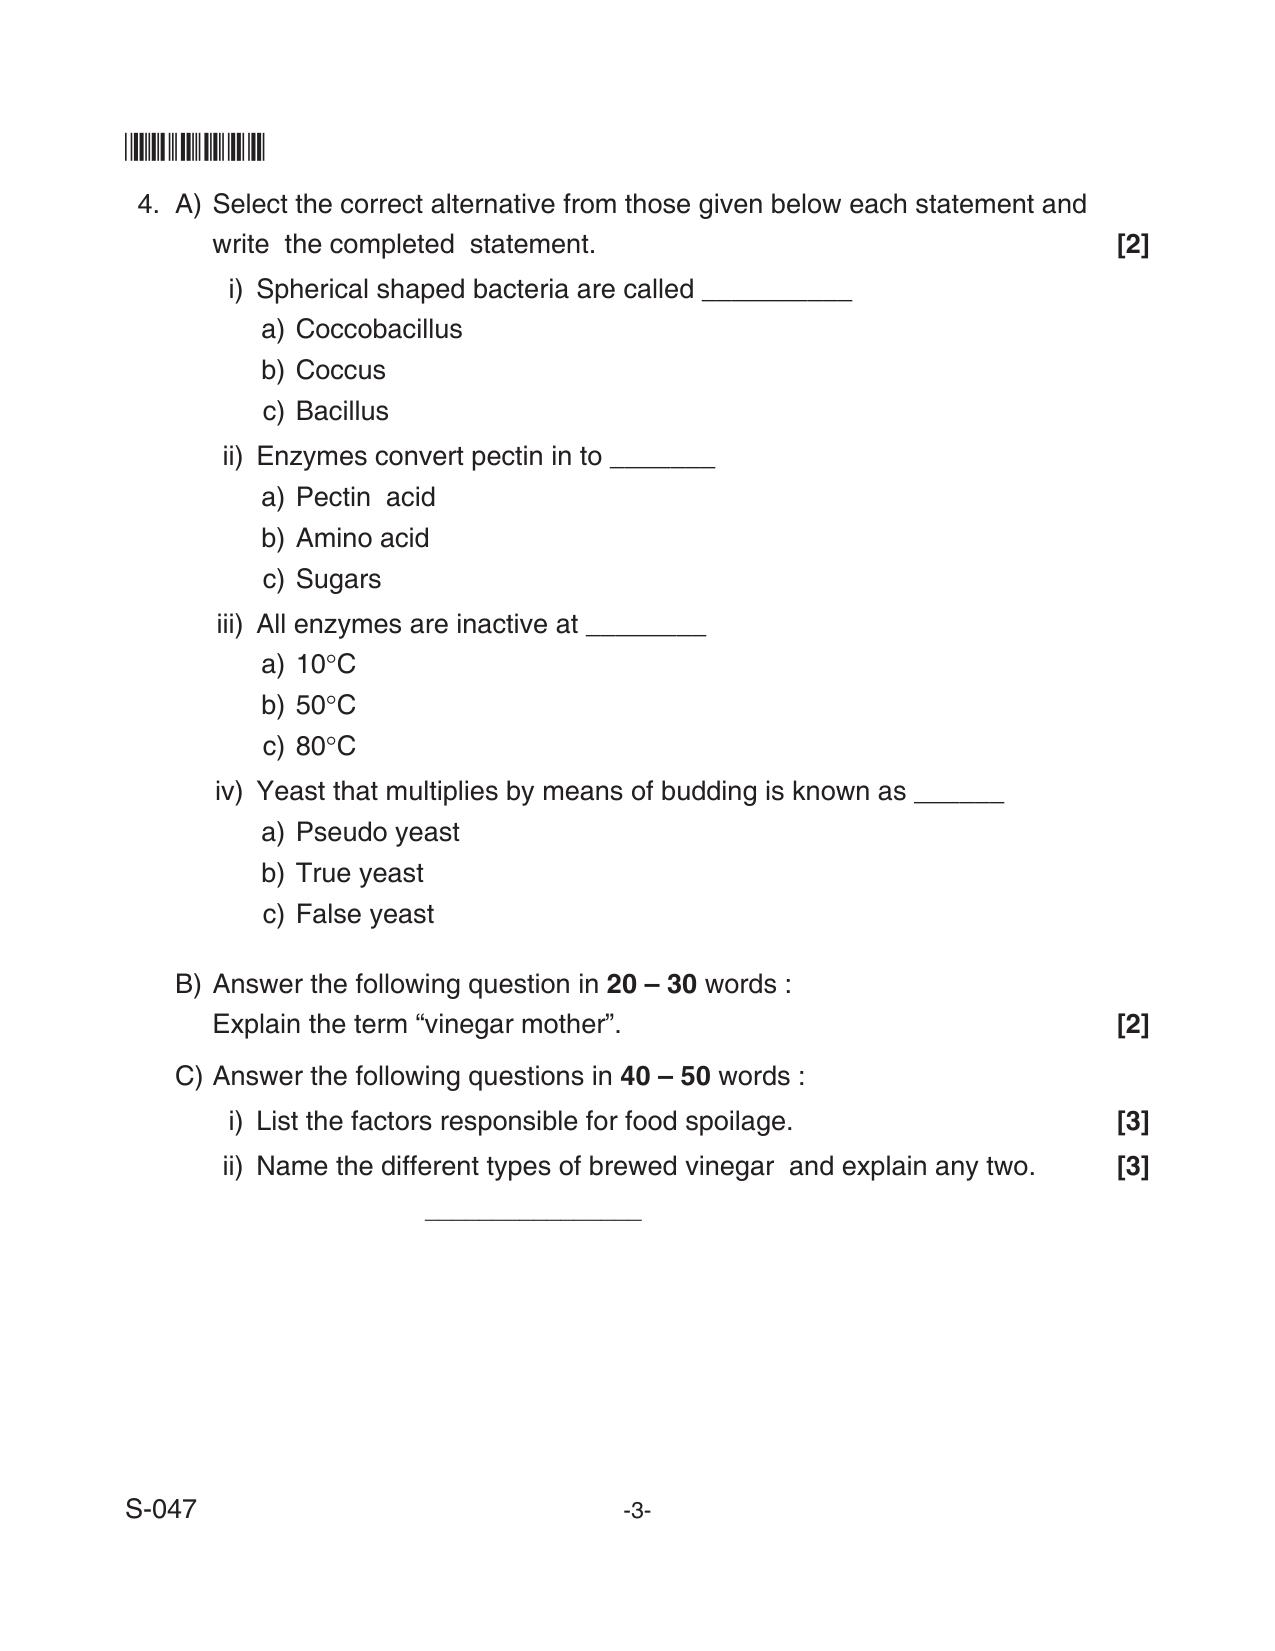 Goa Board Class 10 Food Processing  047 (June 2018) Question Paper - Page 3